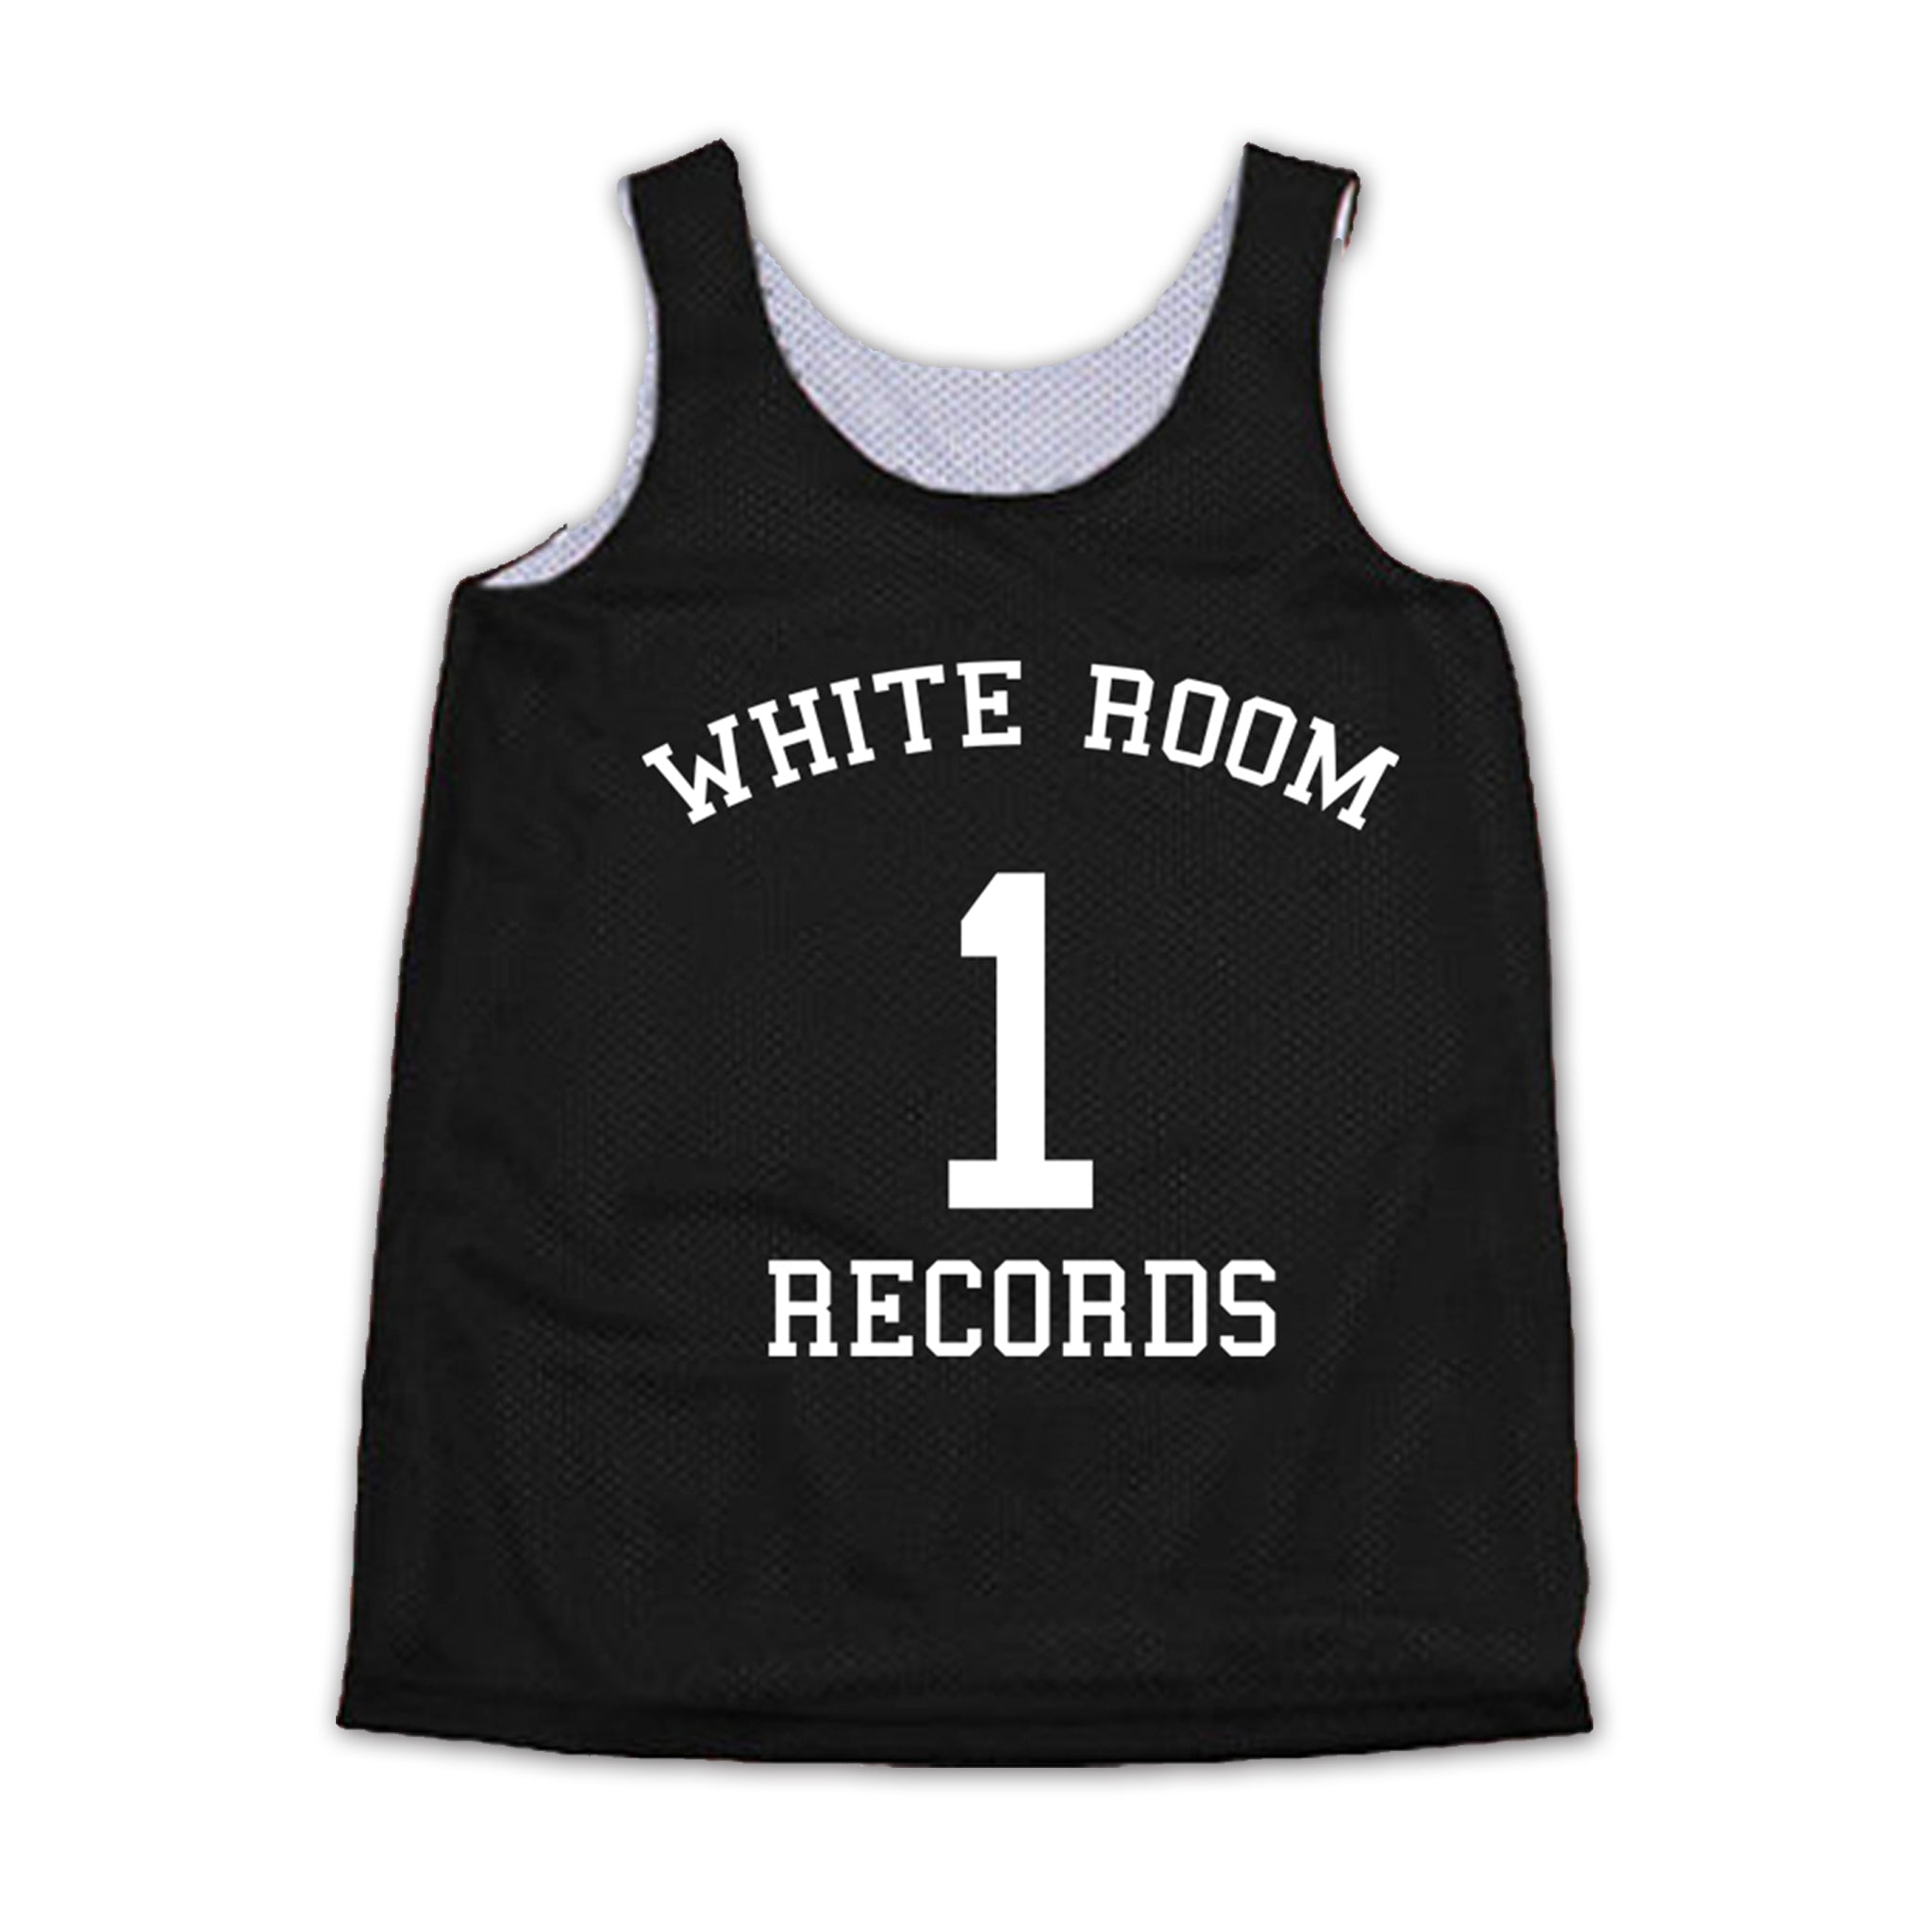 Reversible Basketball Jersey (Limited Edition)